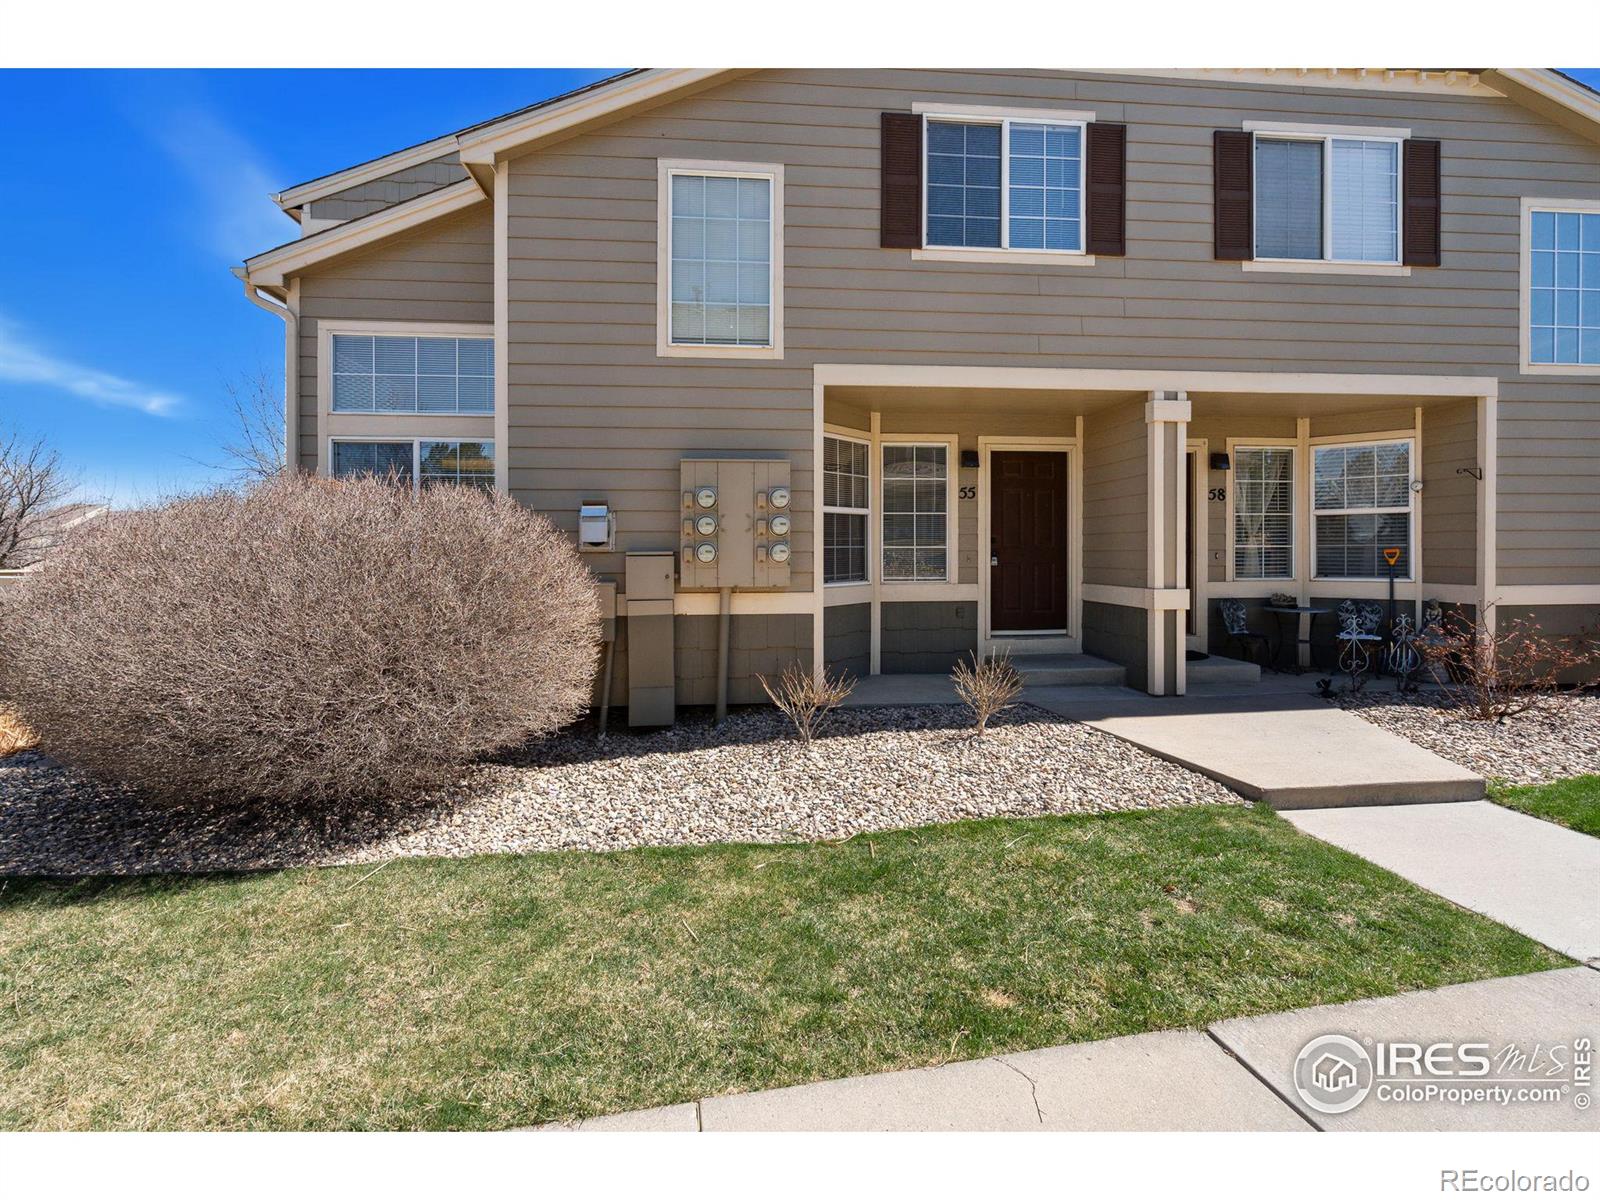 6721  Antigua Drive, fort collins MLS: 4567891006484 Beds: 2 Baths: 2 Price: $380,000